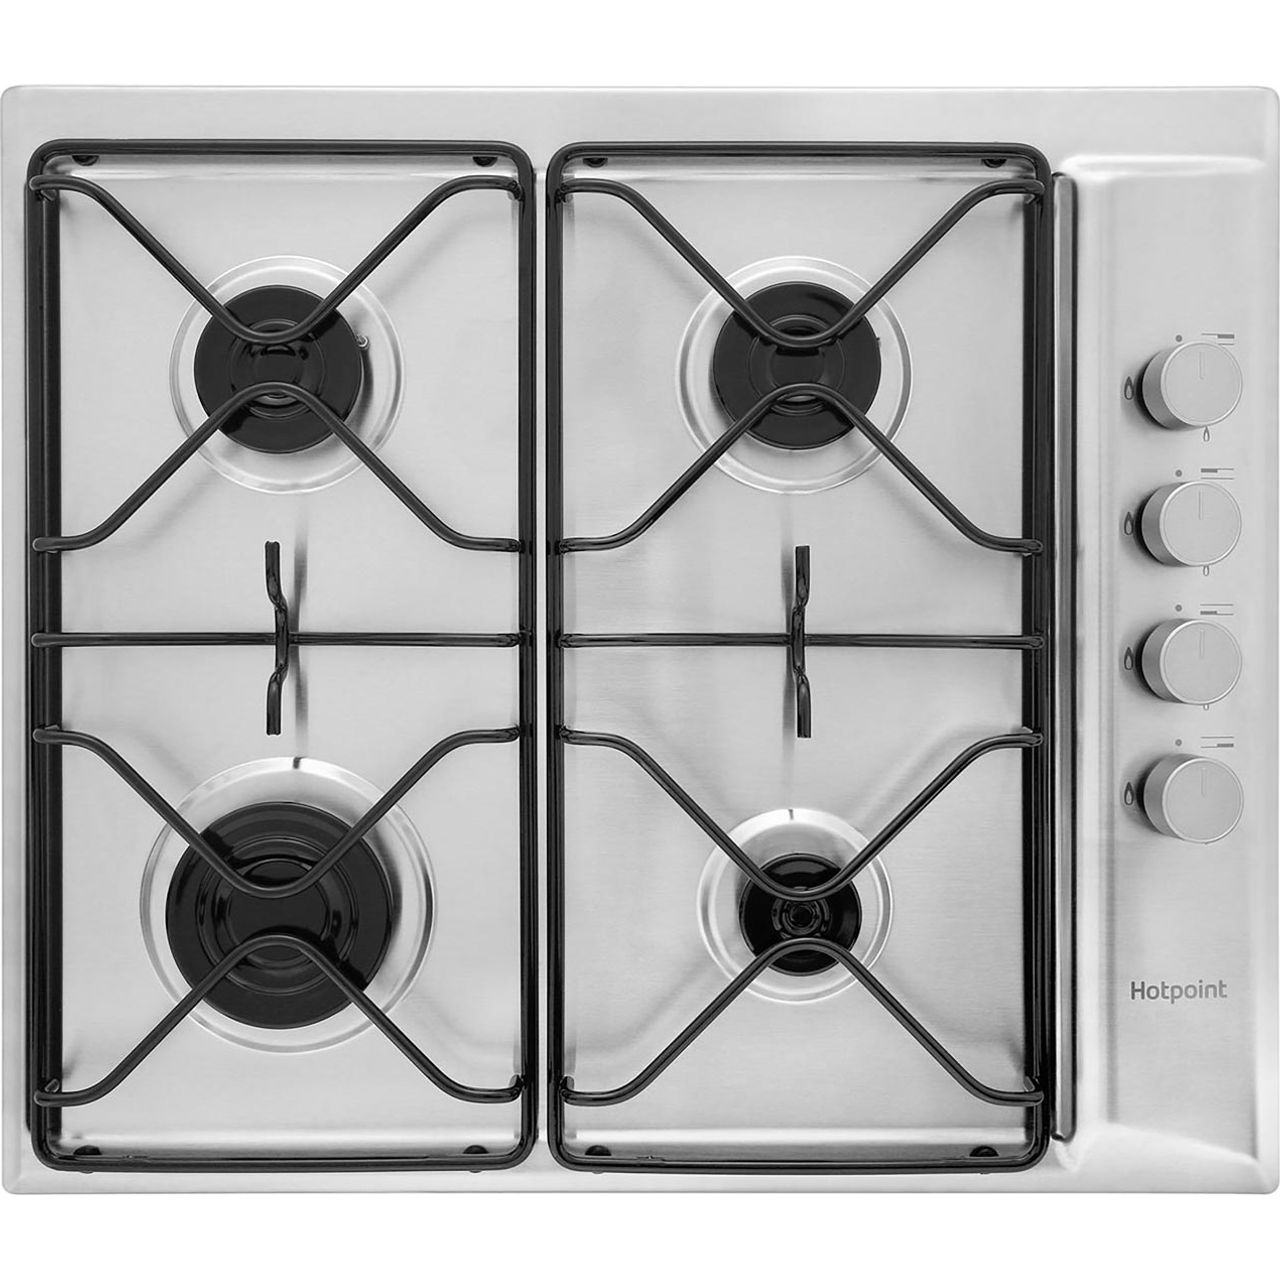 Hotpoint Gas Hob Pan Stand Support Metal Grid GENUINE